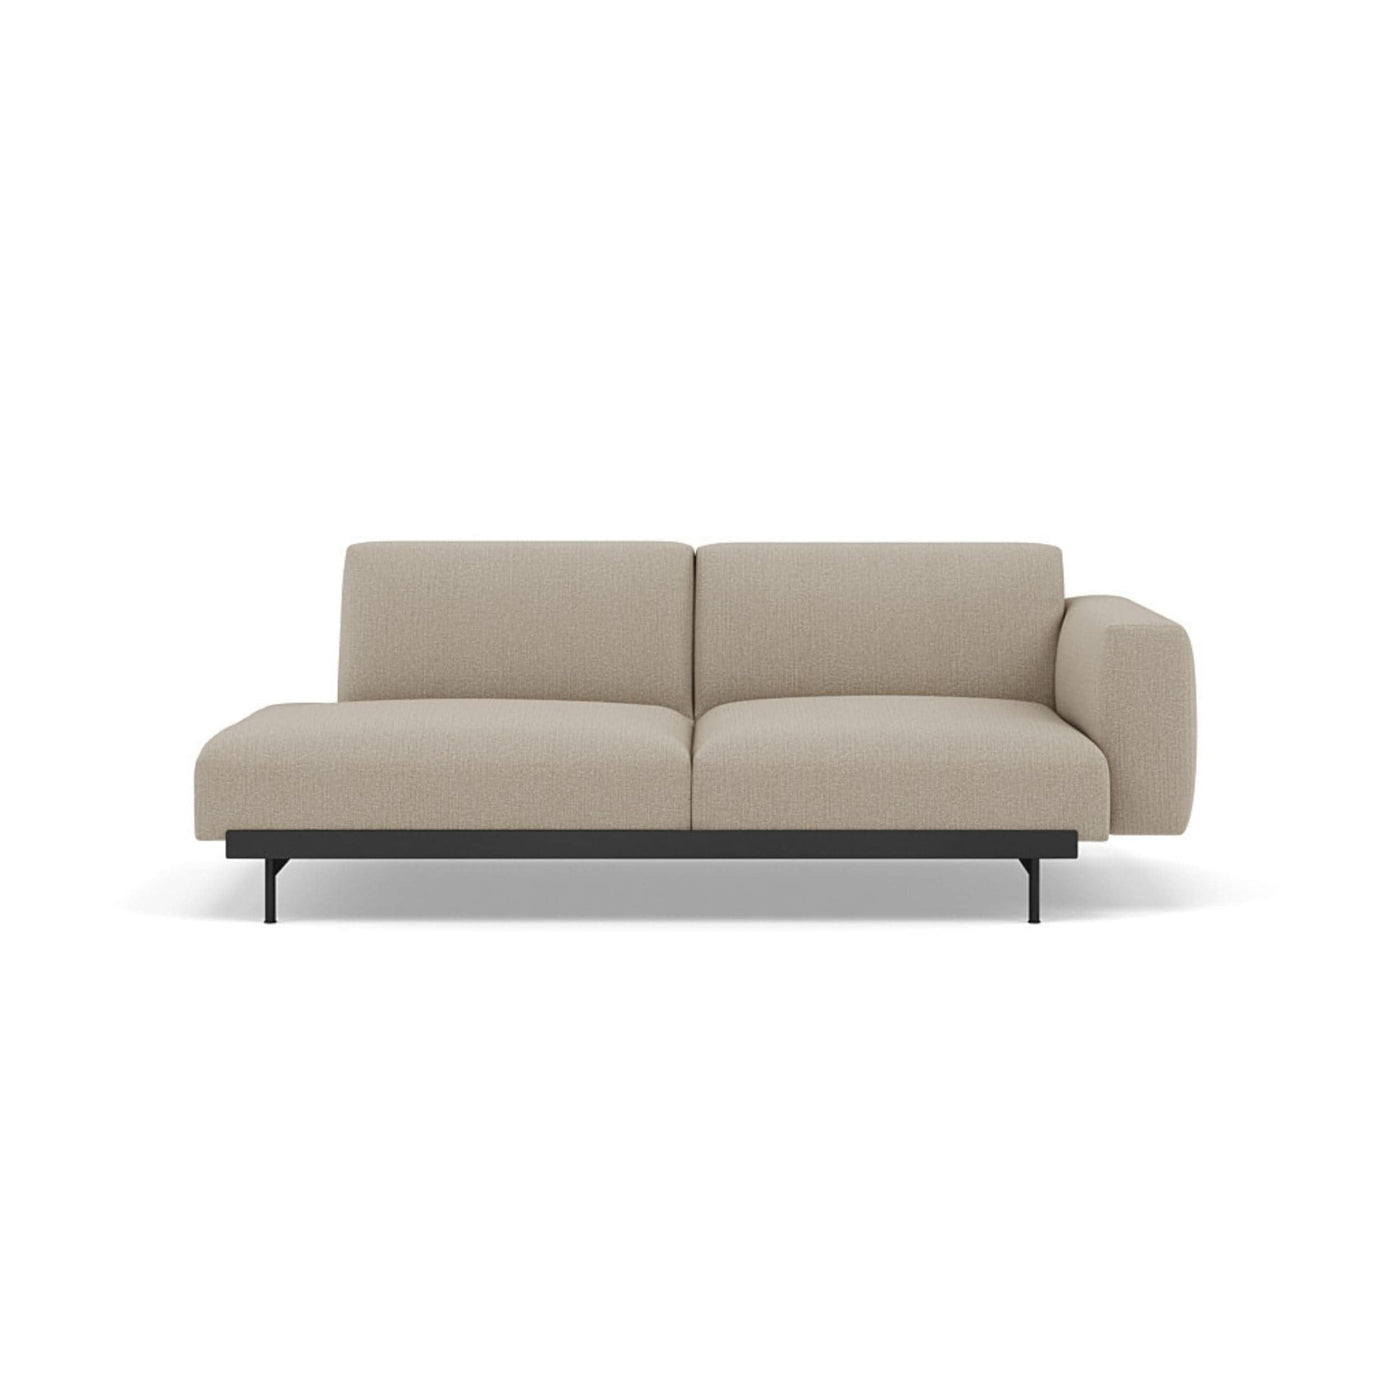 Muuto In Situ Modular 2 Seater Sofa, configuration 2. Made to order from someday designs #colour_clay-10